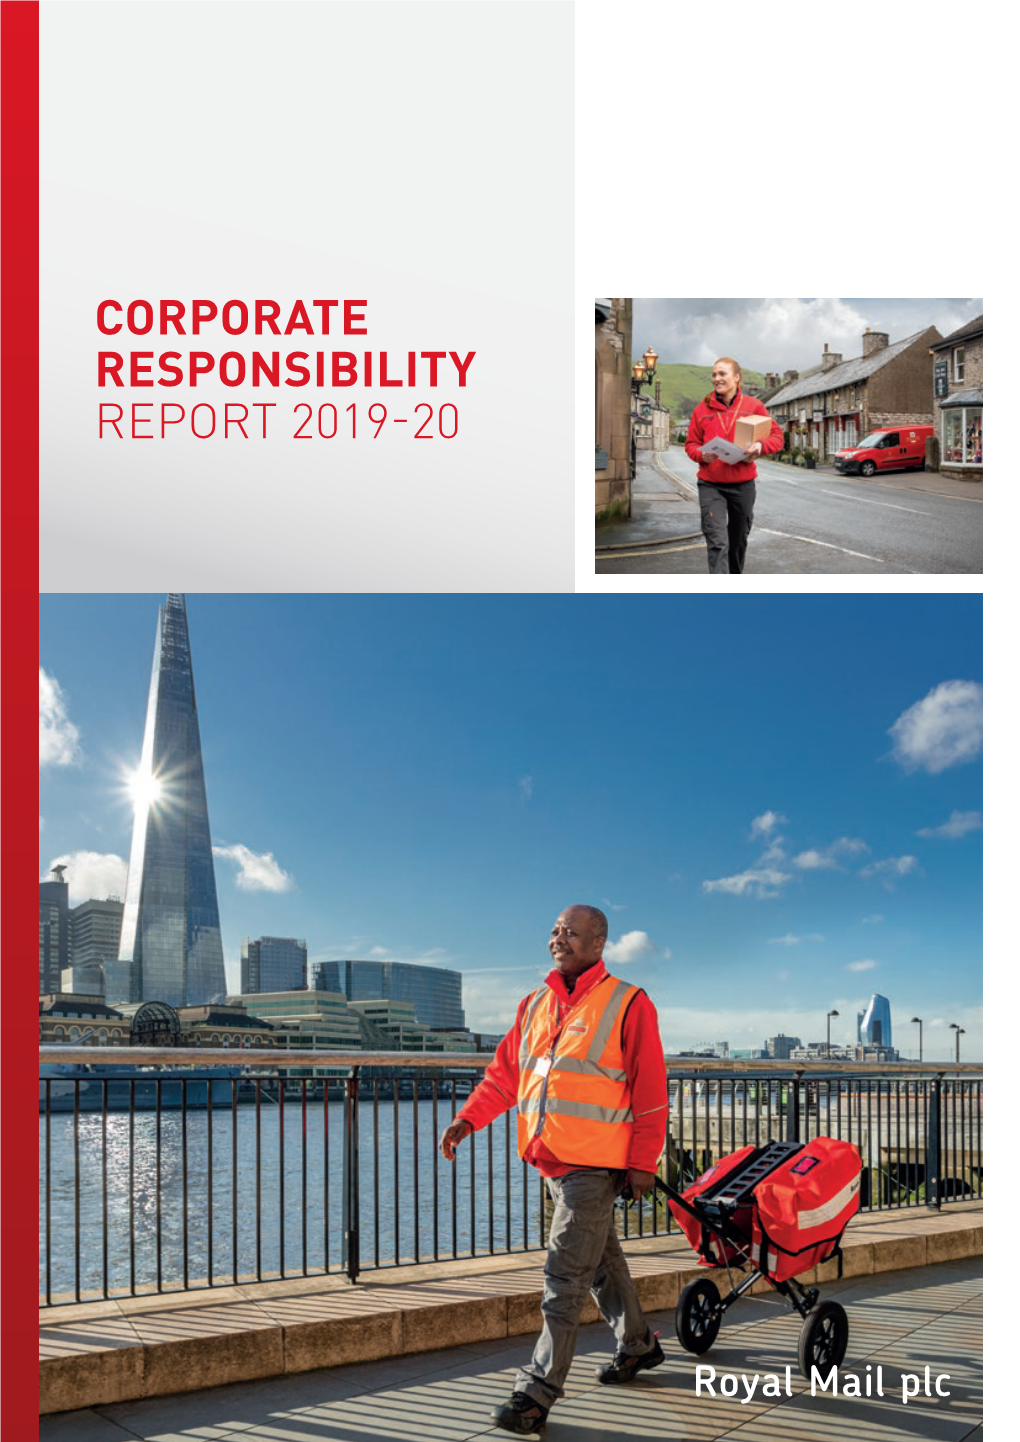 CORPORATE RESPONSIBILITY REPORT 2019-20 About Us